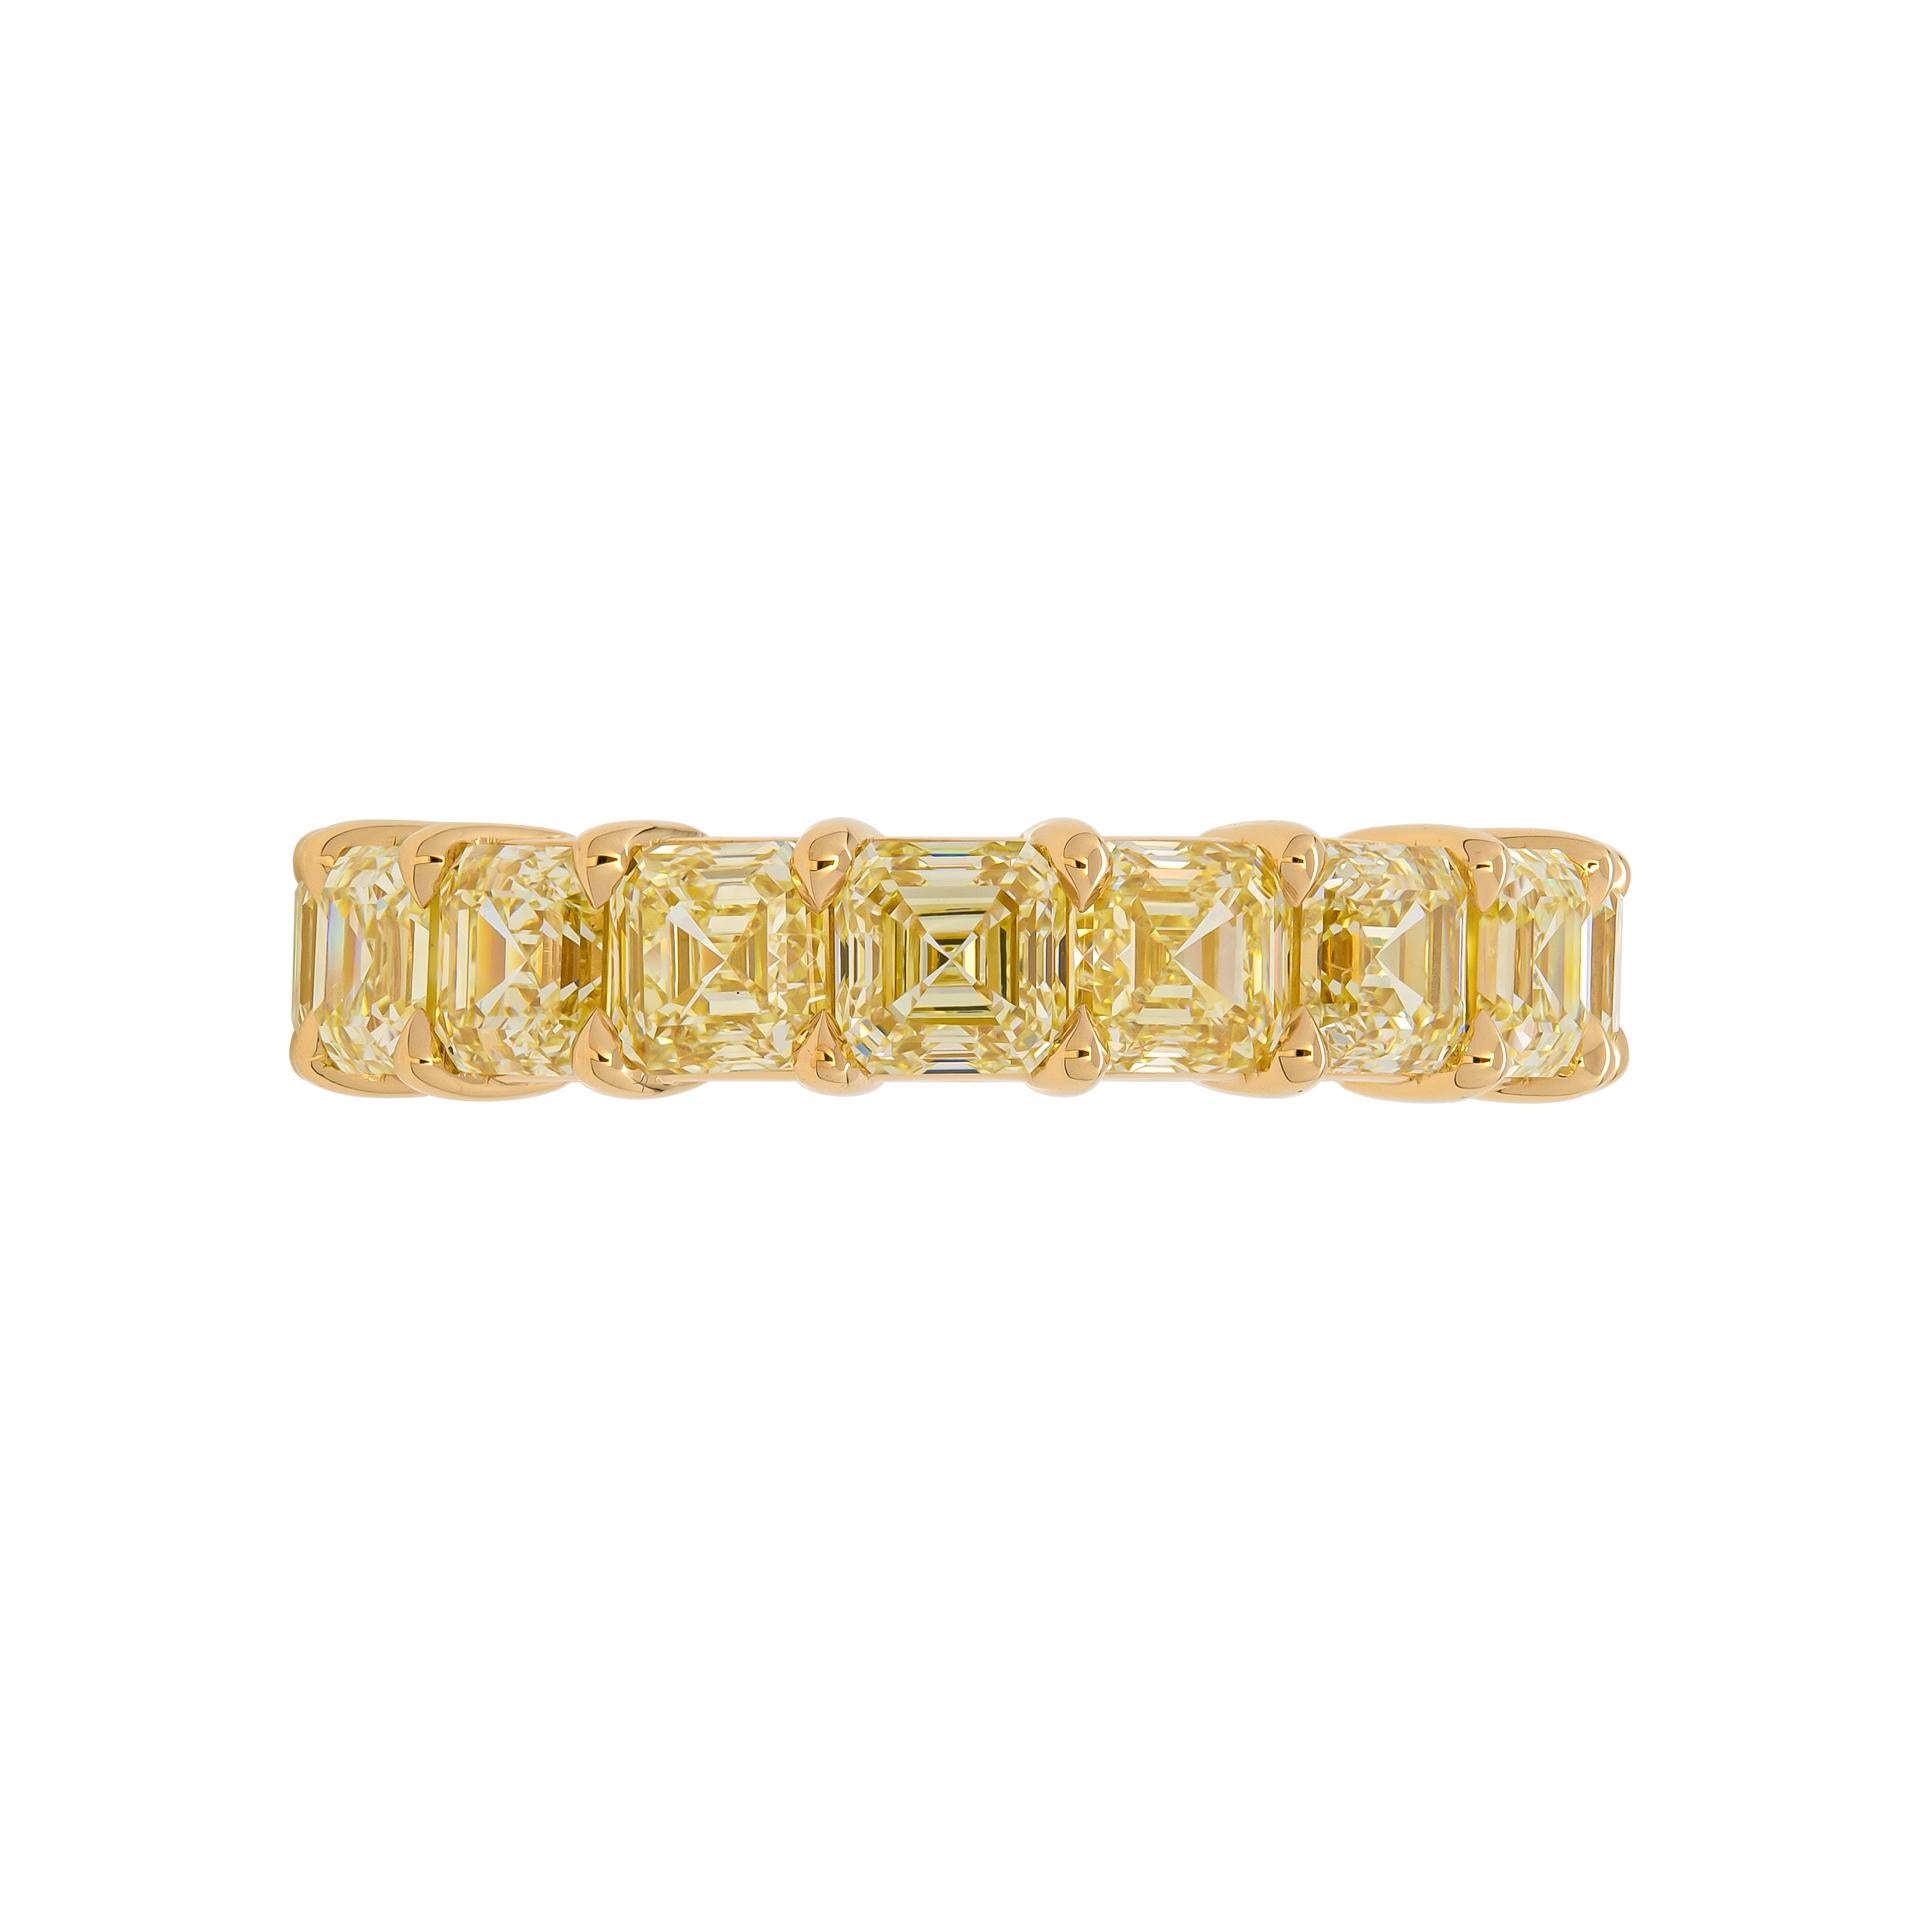 Eternity wedding band in 18K Yellow Gold
 17 stones 0.47ct each TCW: 7.73ct
Fancy Yellow Asscher cut Diamonds 
 Size: 6 1/4
Comes in original box, appraisal available upon request 